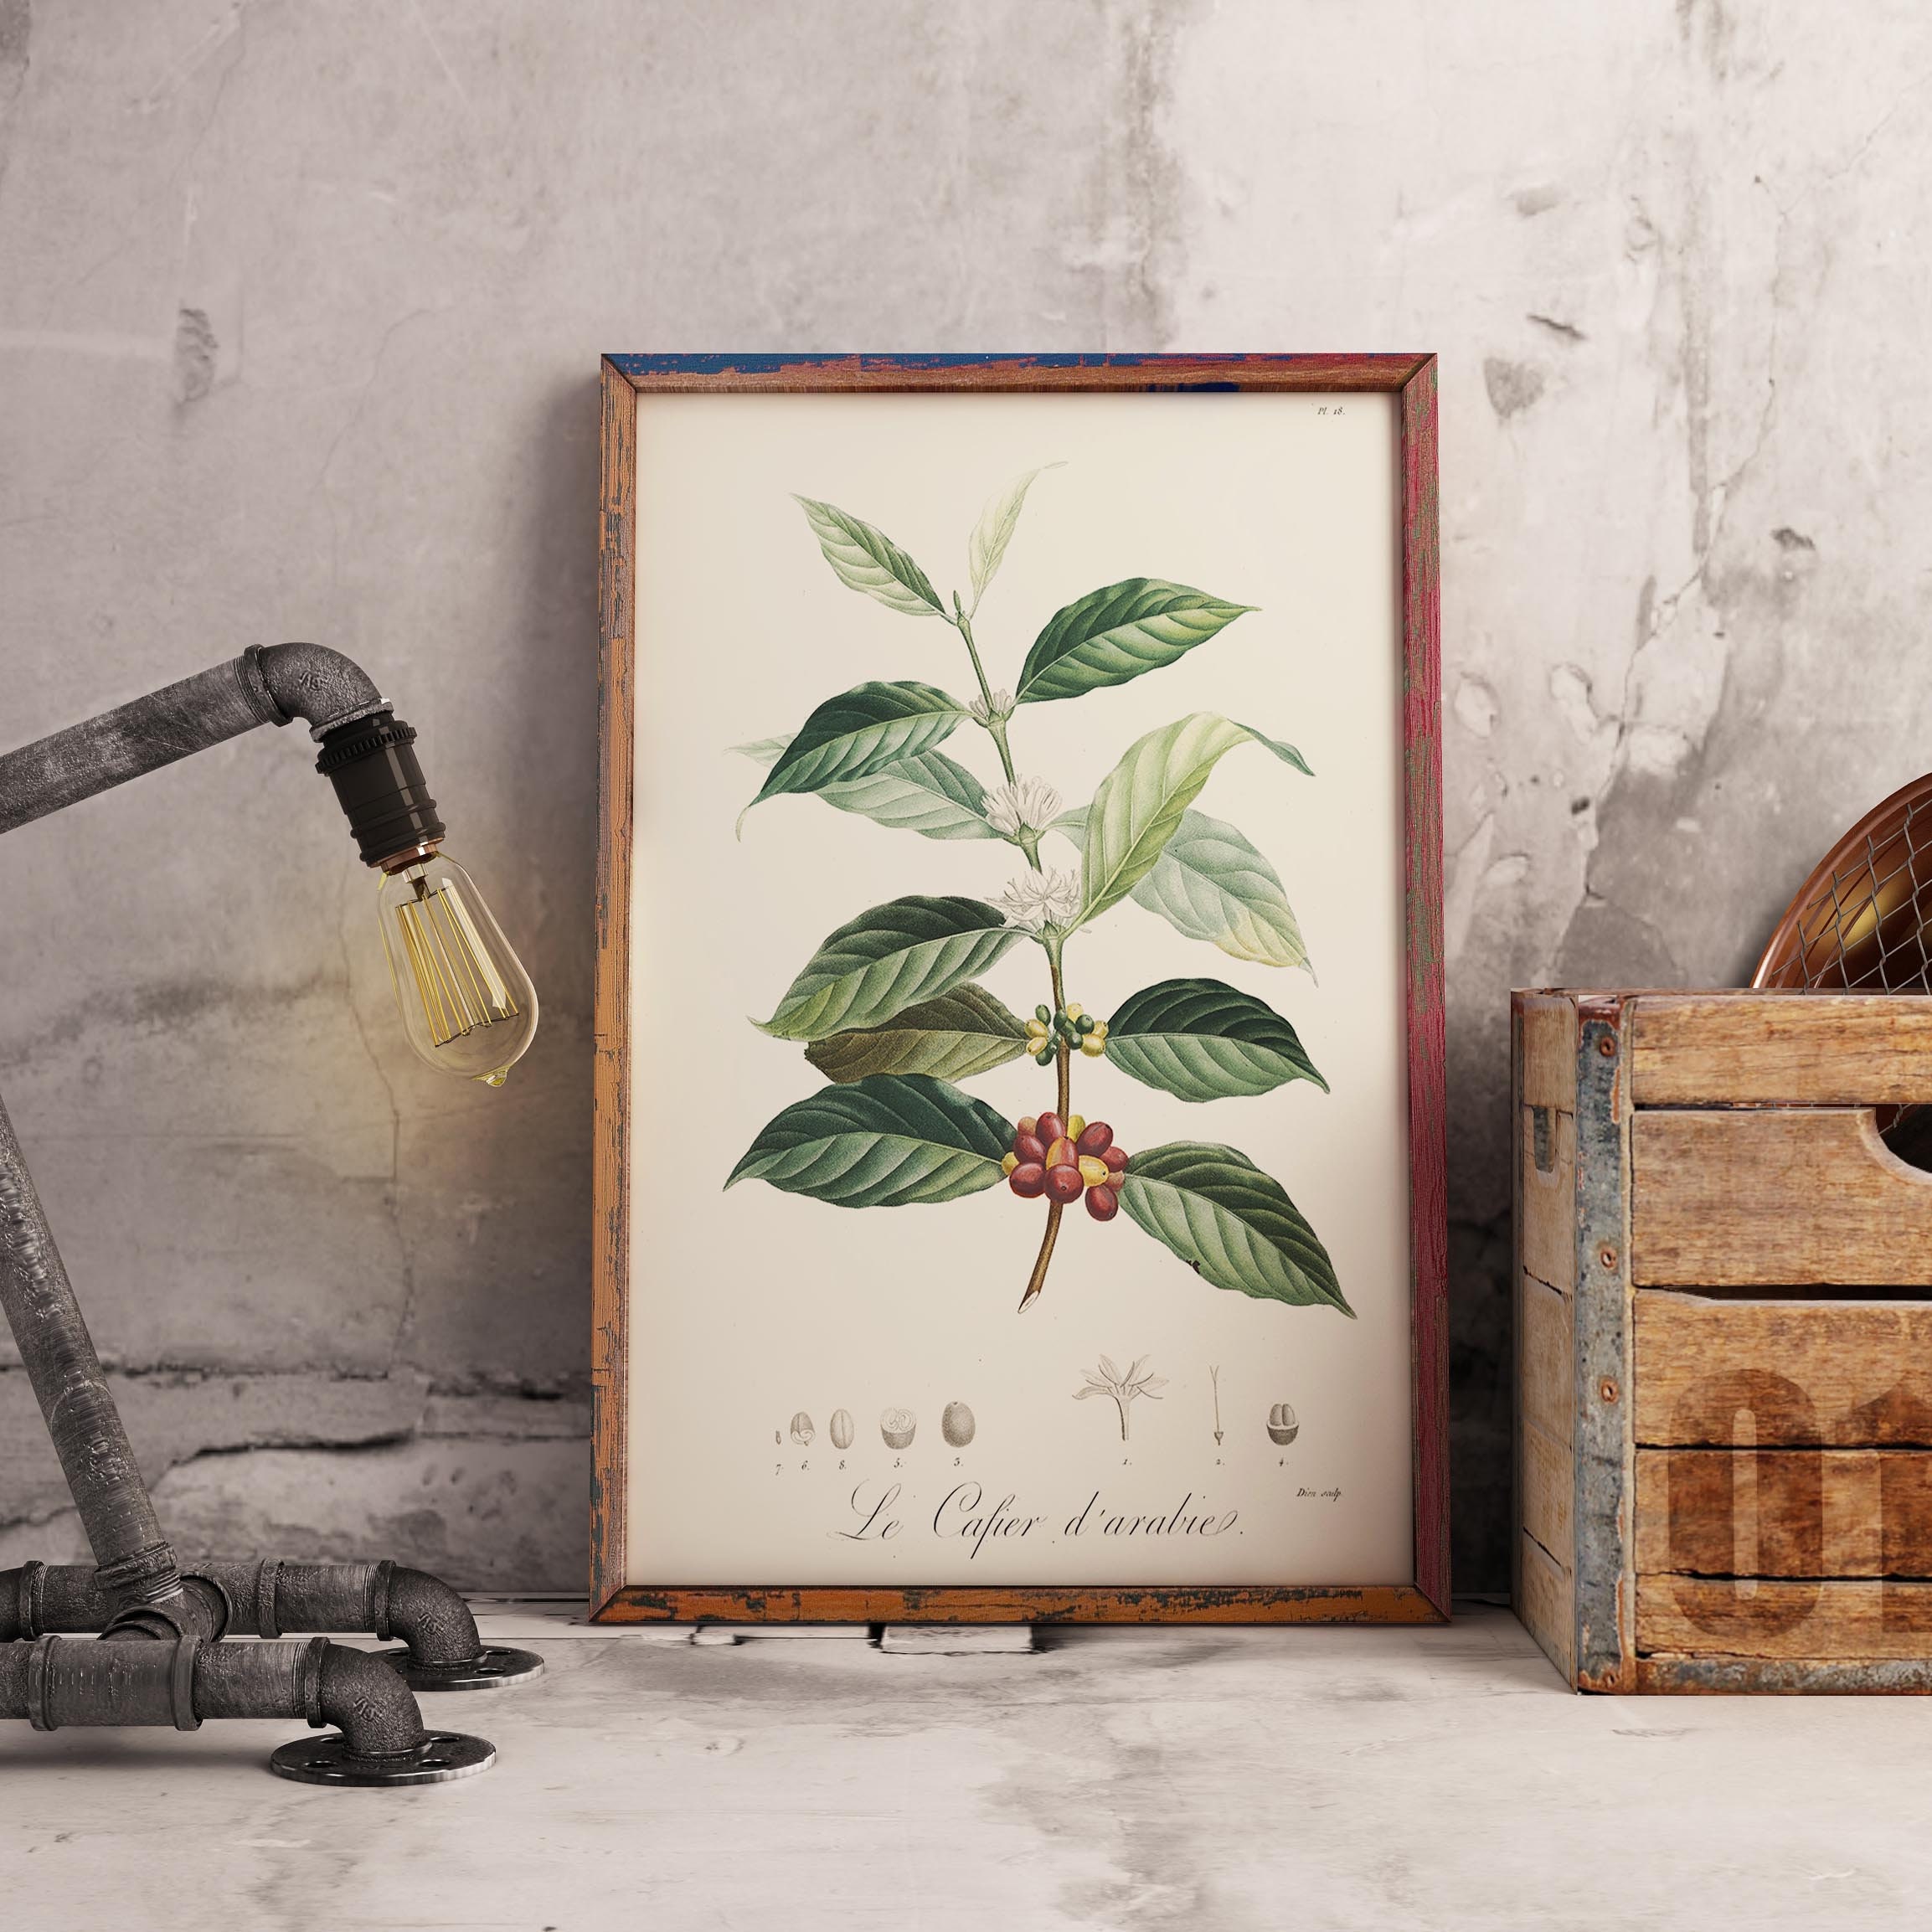 Vintage Coffee Poster - Coffea Arabica - original from old french botany book